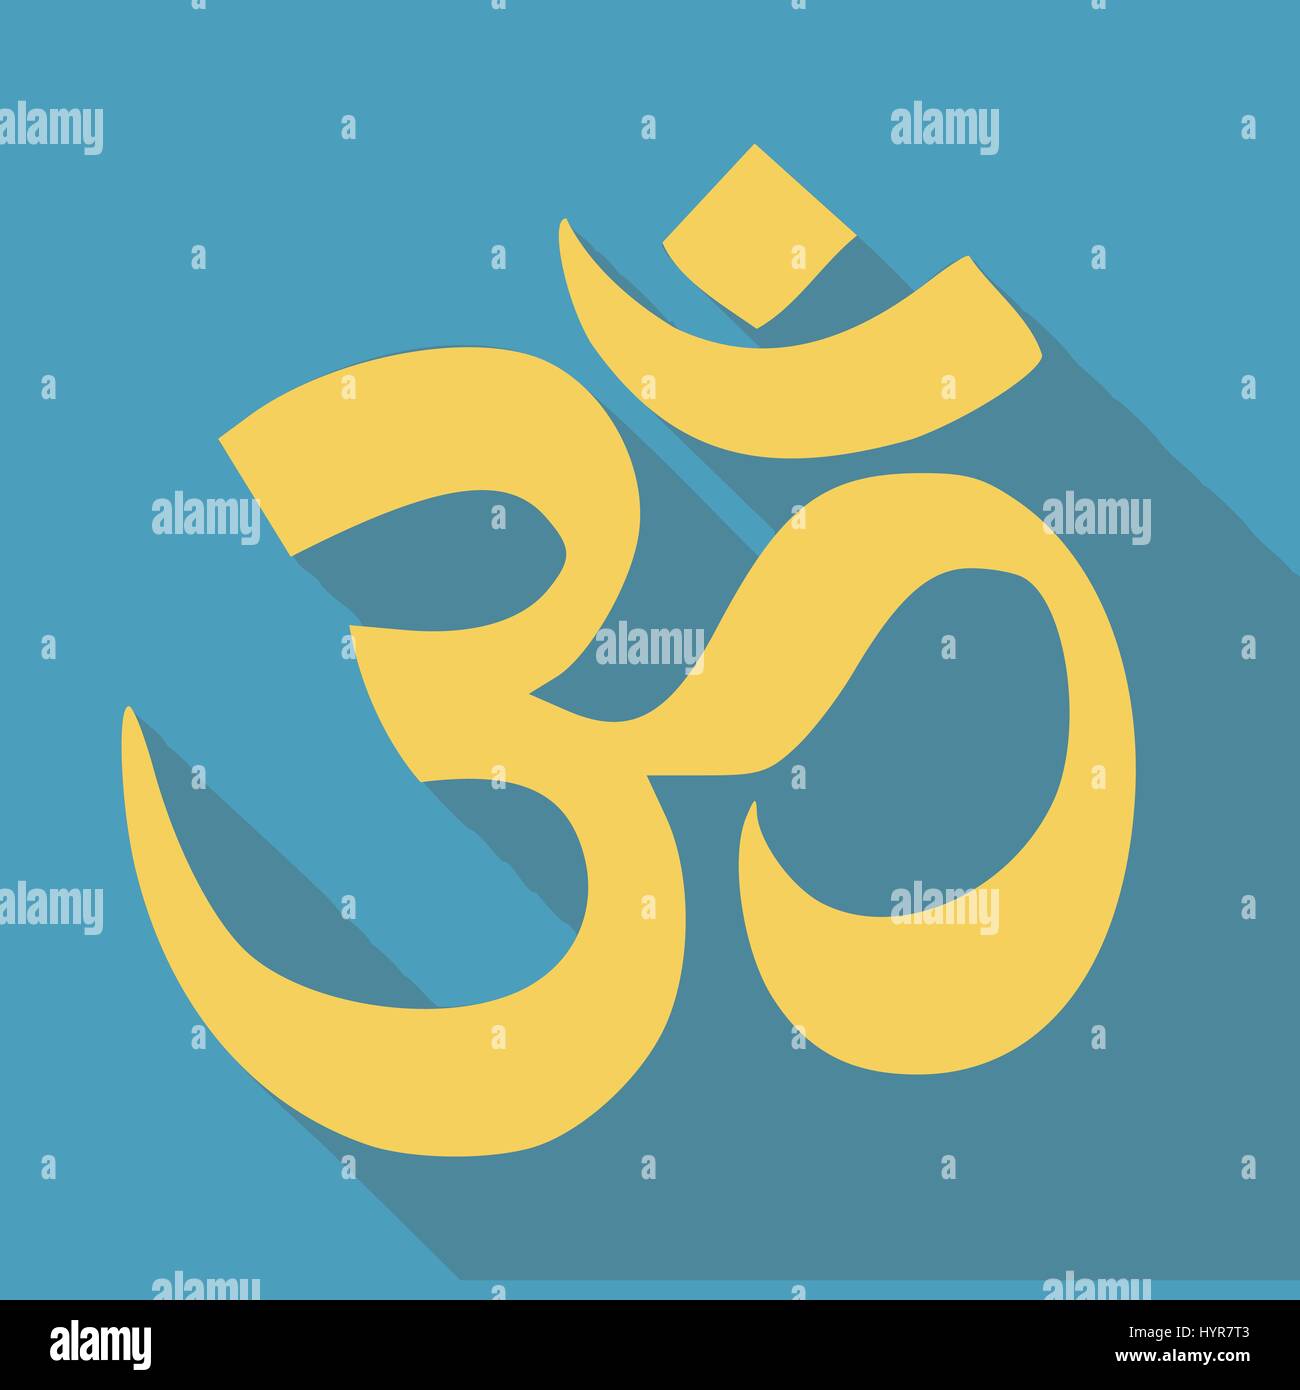 Om / Aum - symbol of Hinduism flat icon for apps and websites Stock Vector